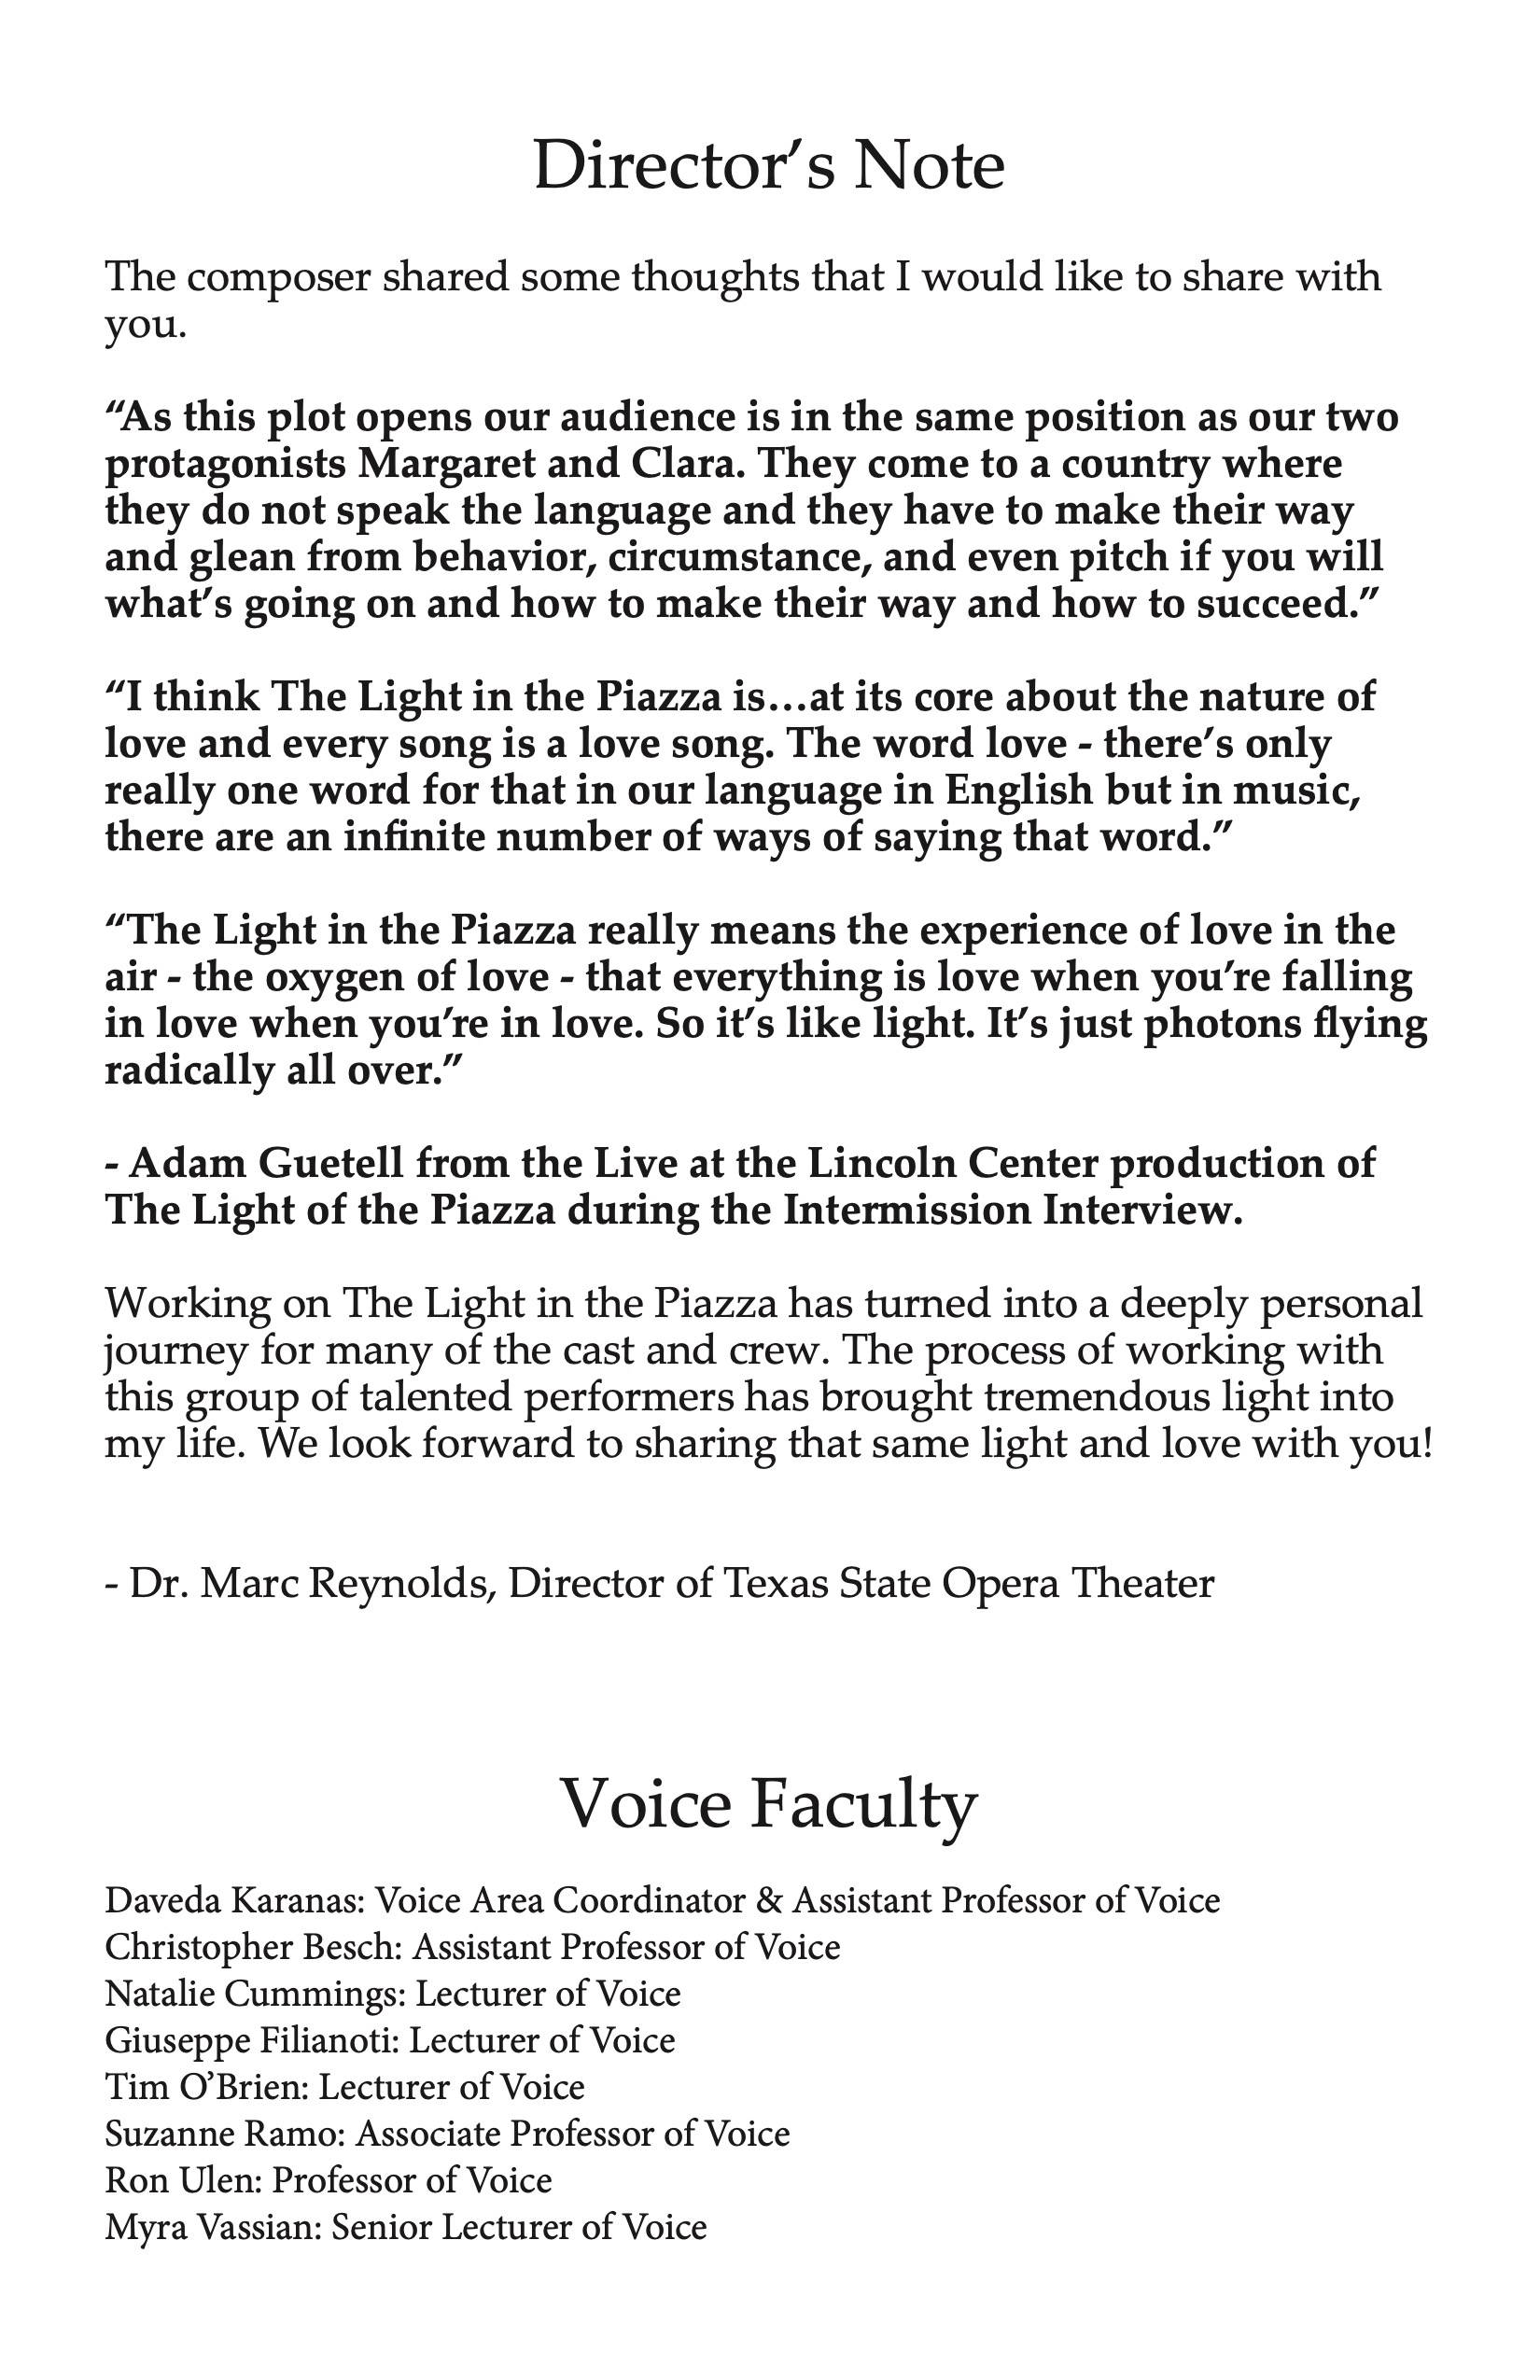 The Light in the Piazza Program pg 2